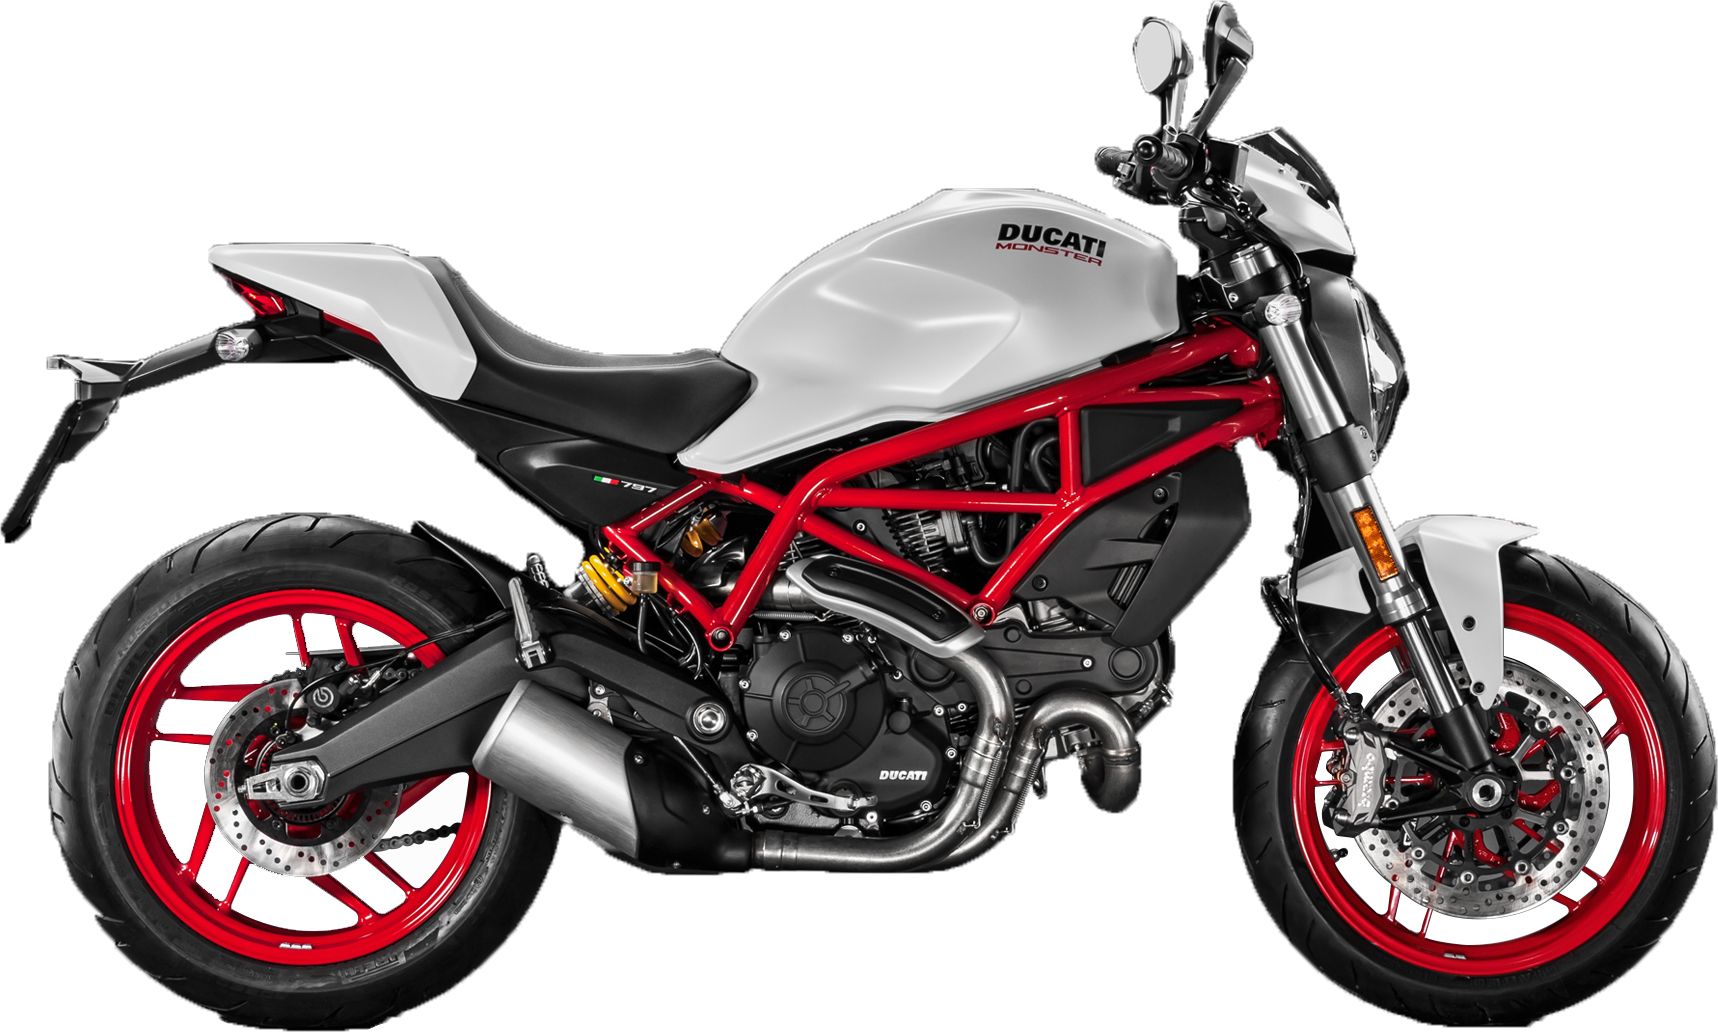 DUCATI MONSTER 797 PLUS Photo, Image and Wallpaper, Colours